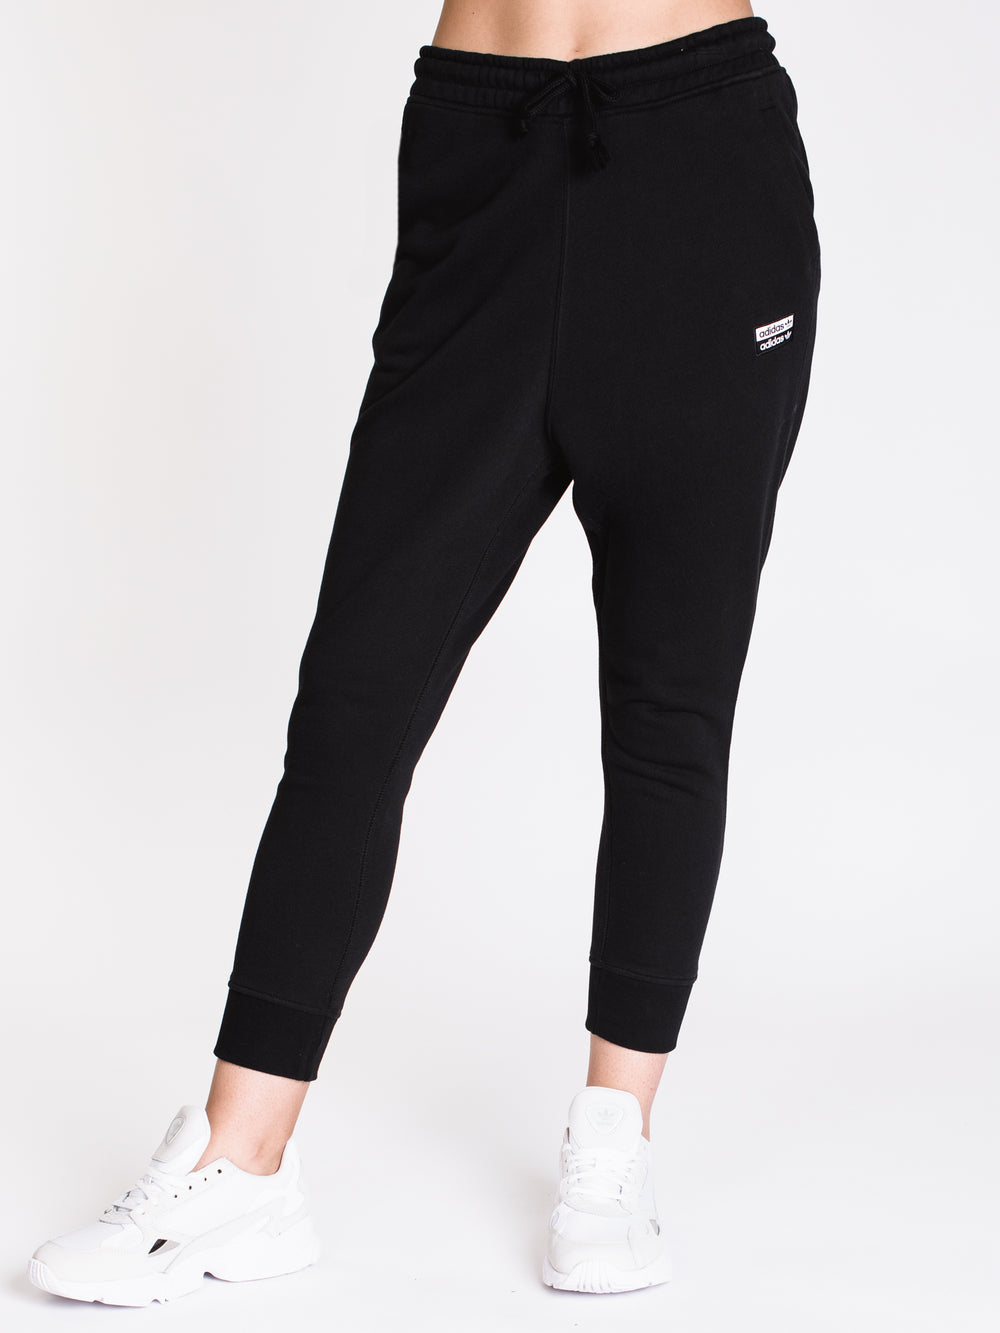 WOMENS VOCAL PANT - BLACK - CLEARANCE